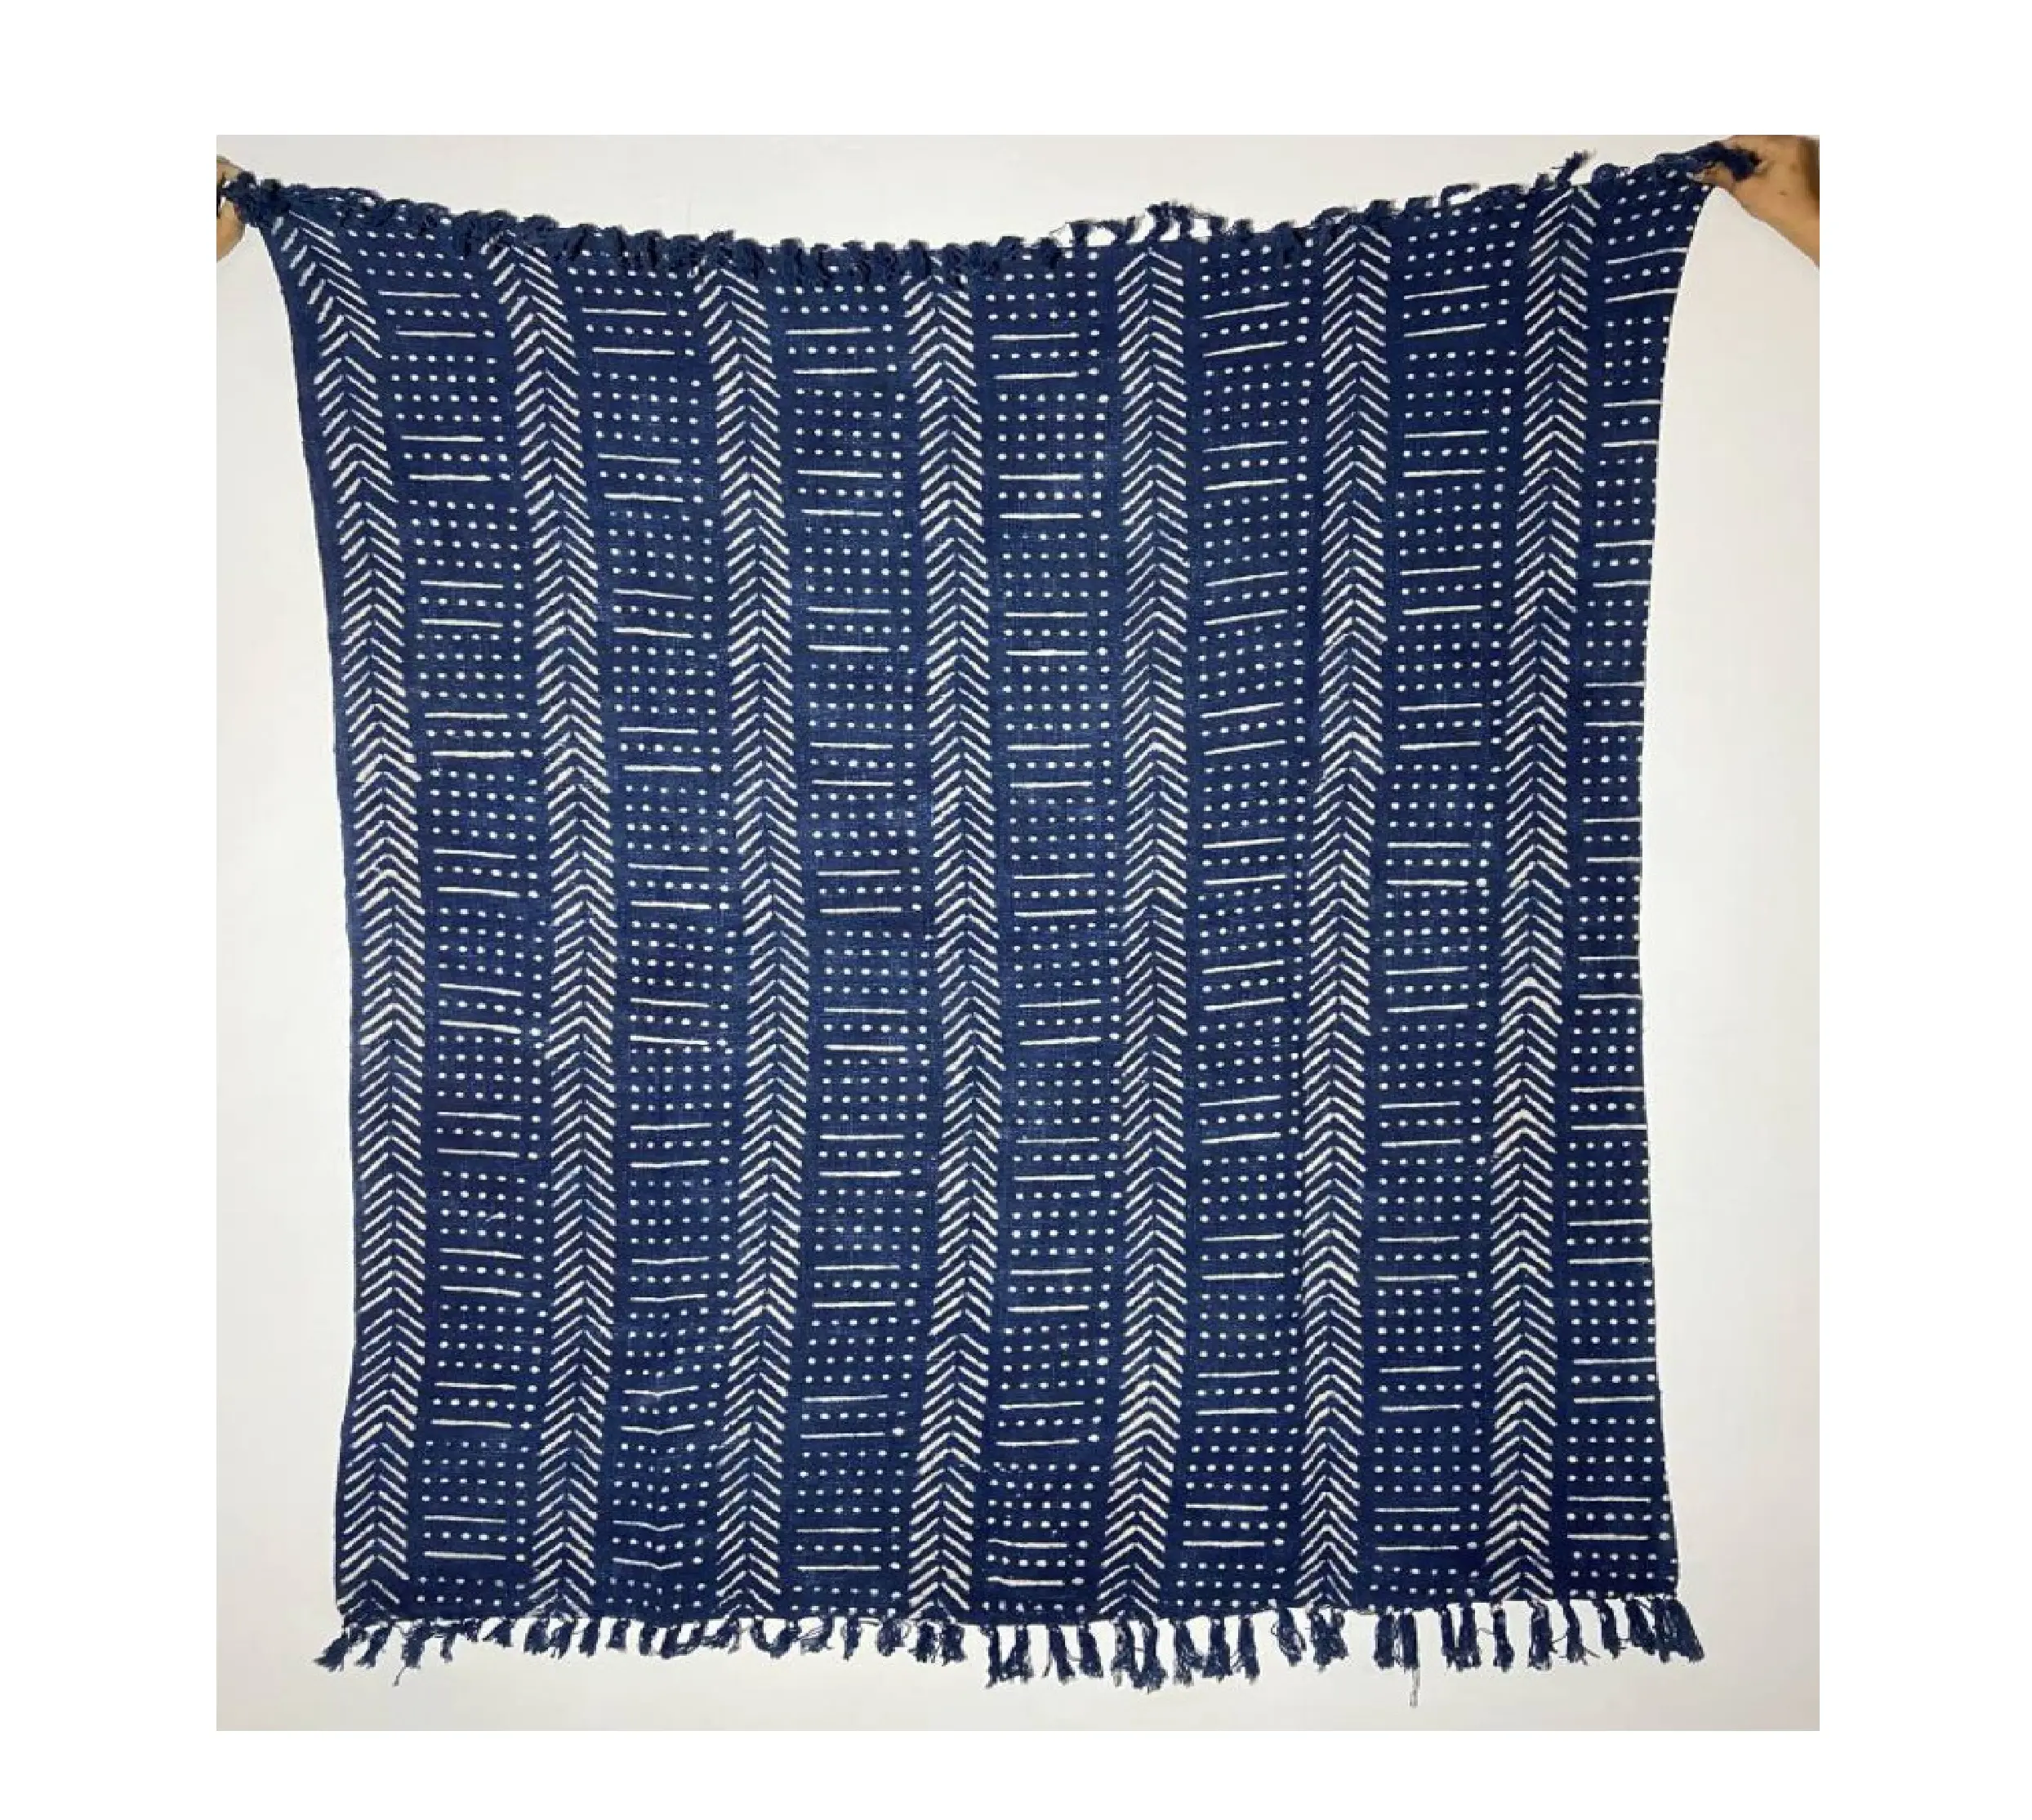 Luxury Bohemian Hippie Outdoor Decorative 100% Cotton Hand Block Printed High Quality Sofa Couch African Mud Cloth Throw Blanket